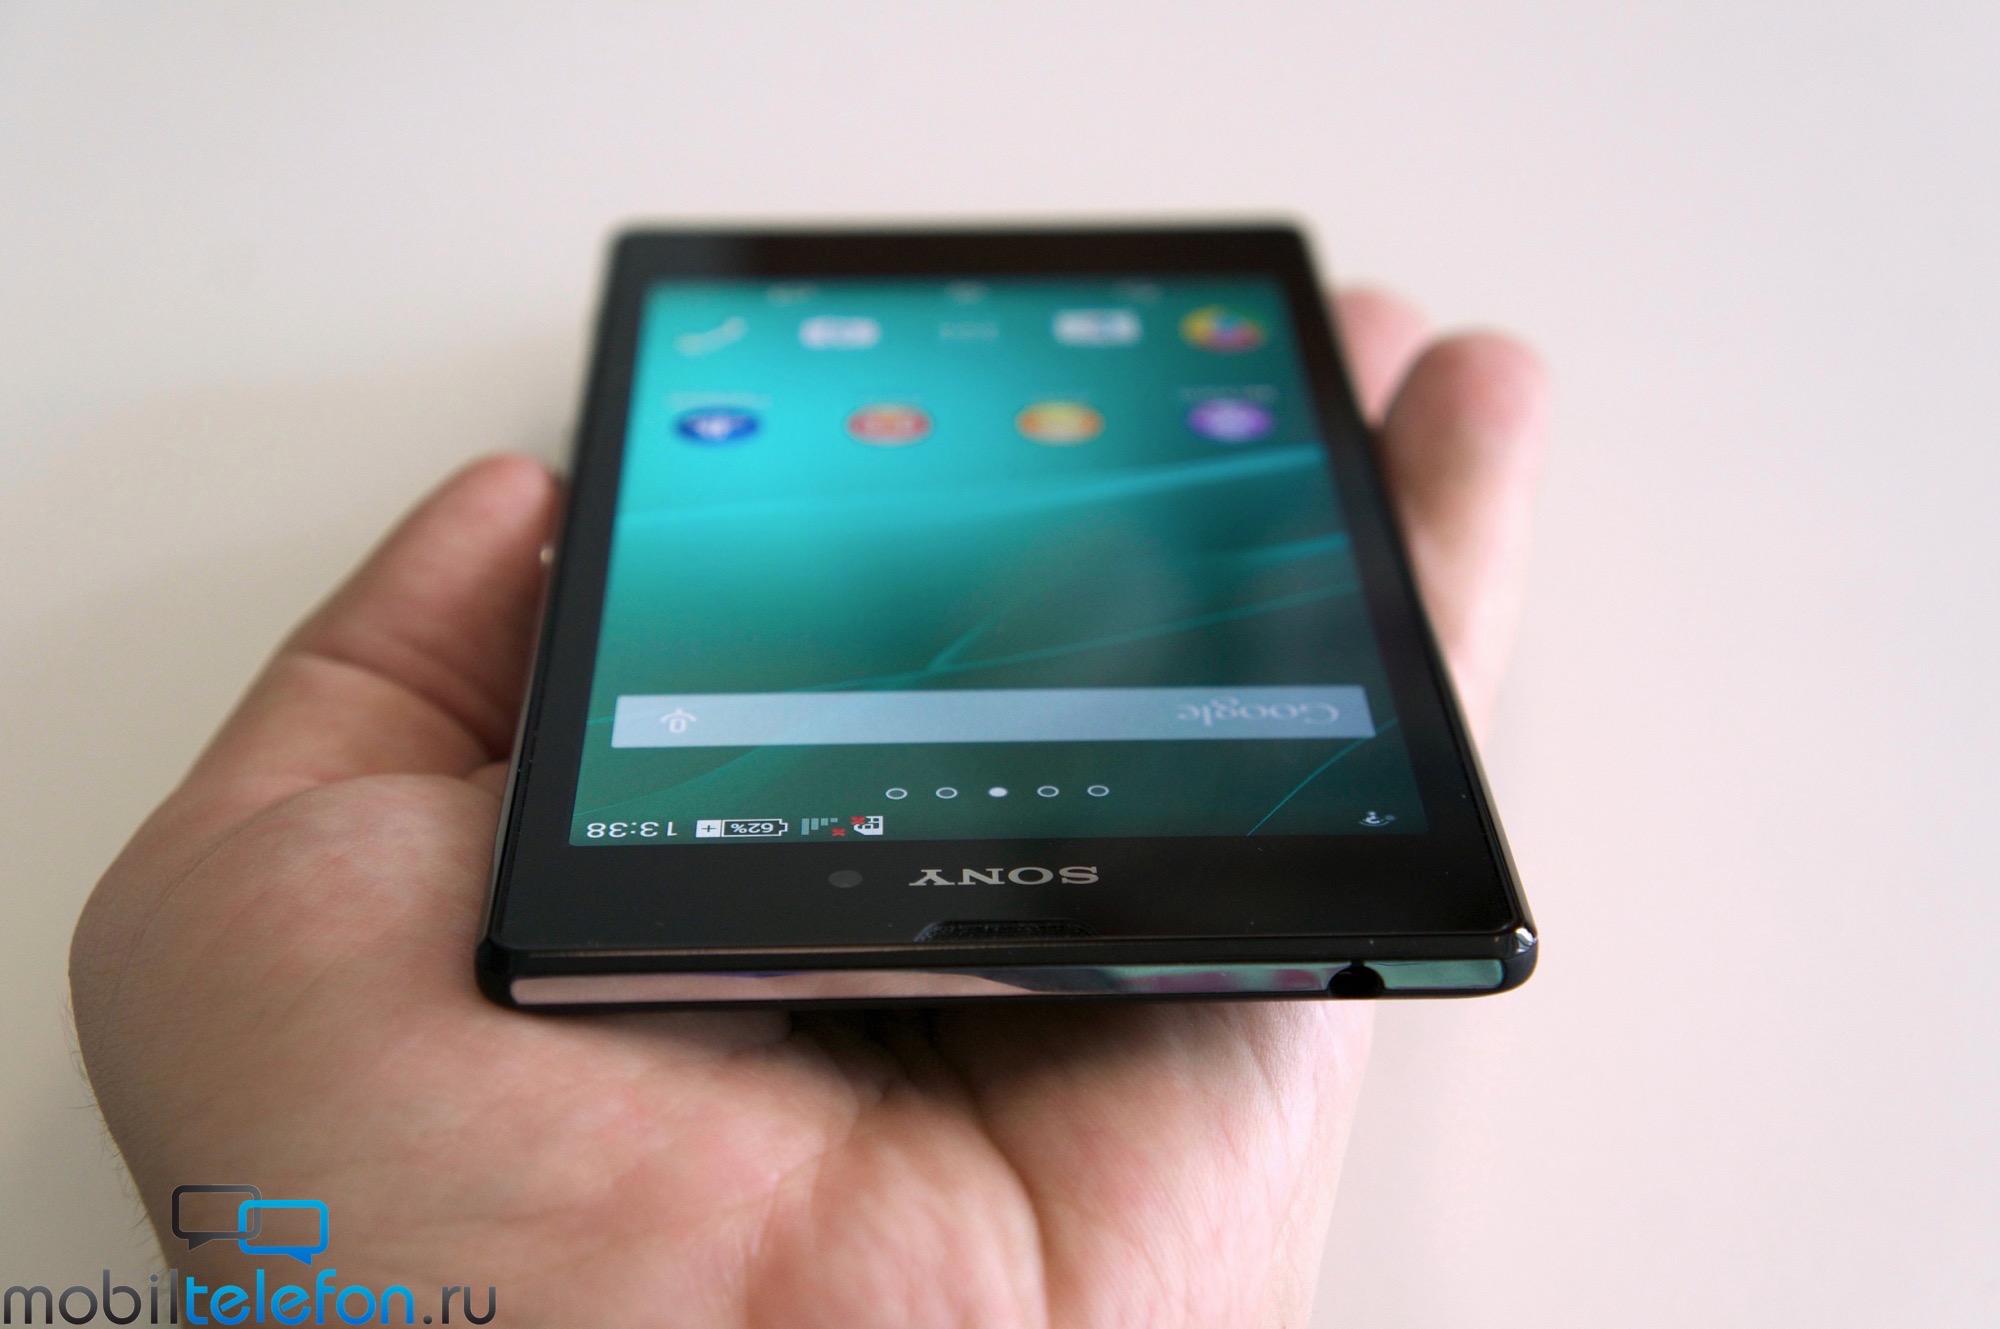 Black Xperia T3 hands on photos